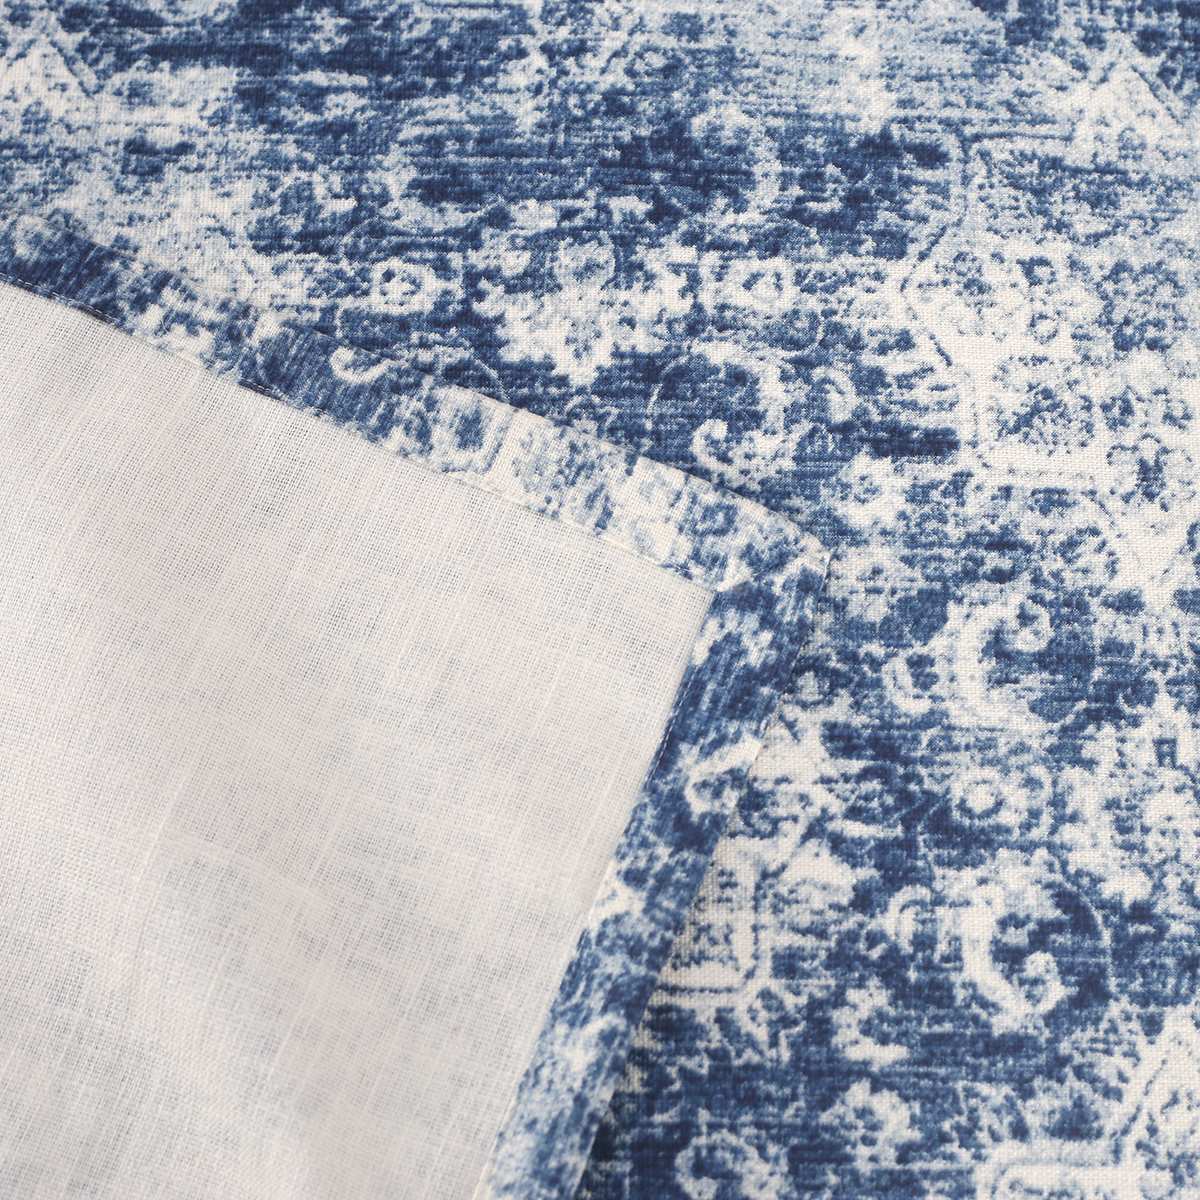 Rustic Clash Hyper Graphic Blue Printed Bed Cover